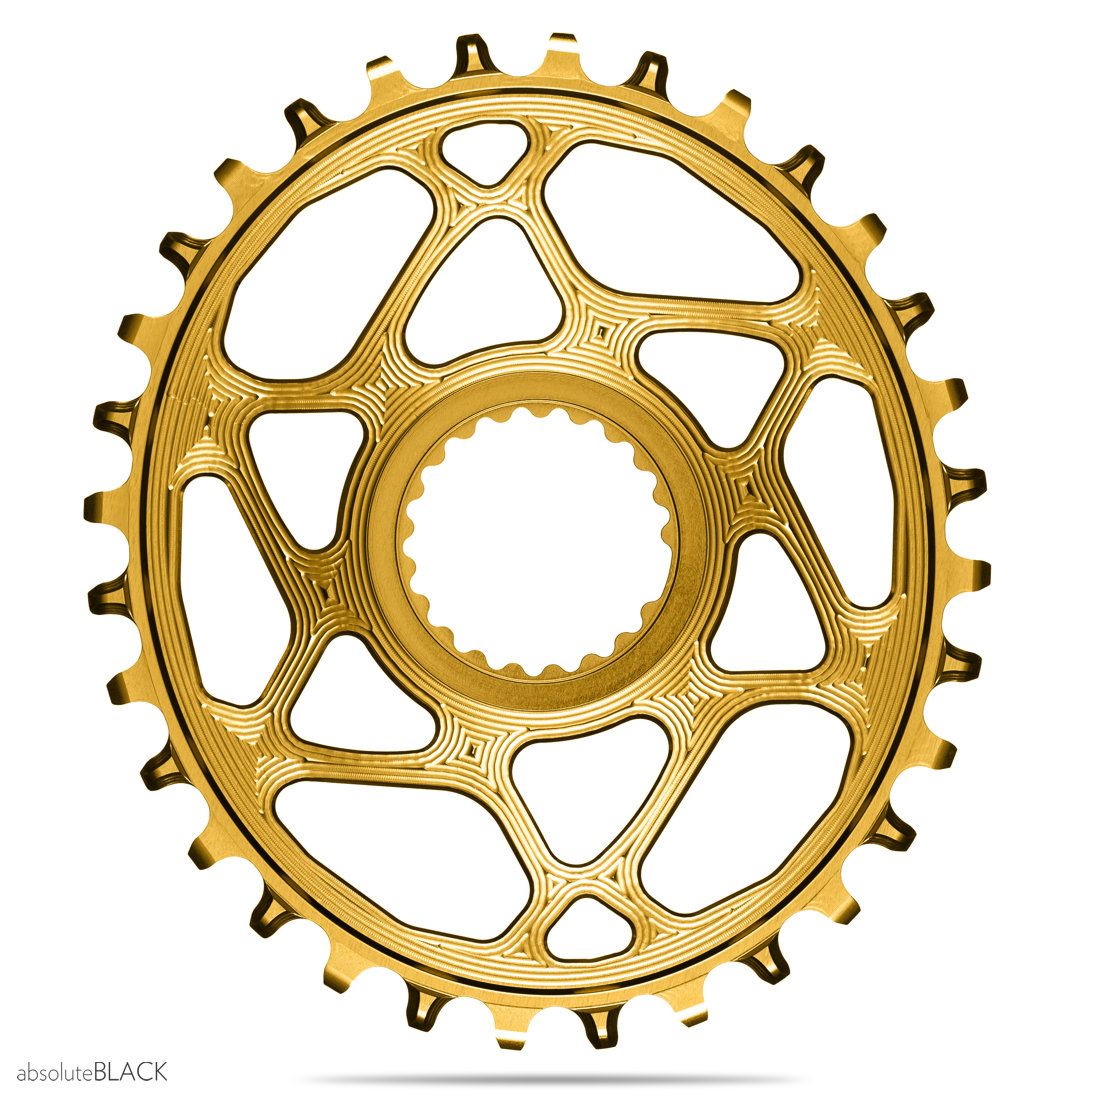 OVAL traction chainring for shimano XTR M9100 cranks